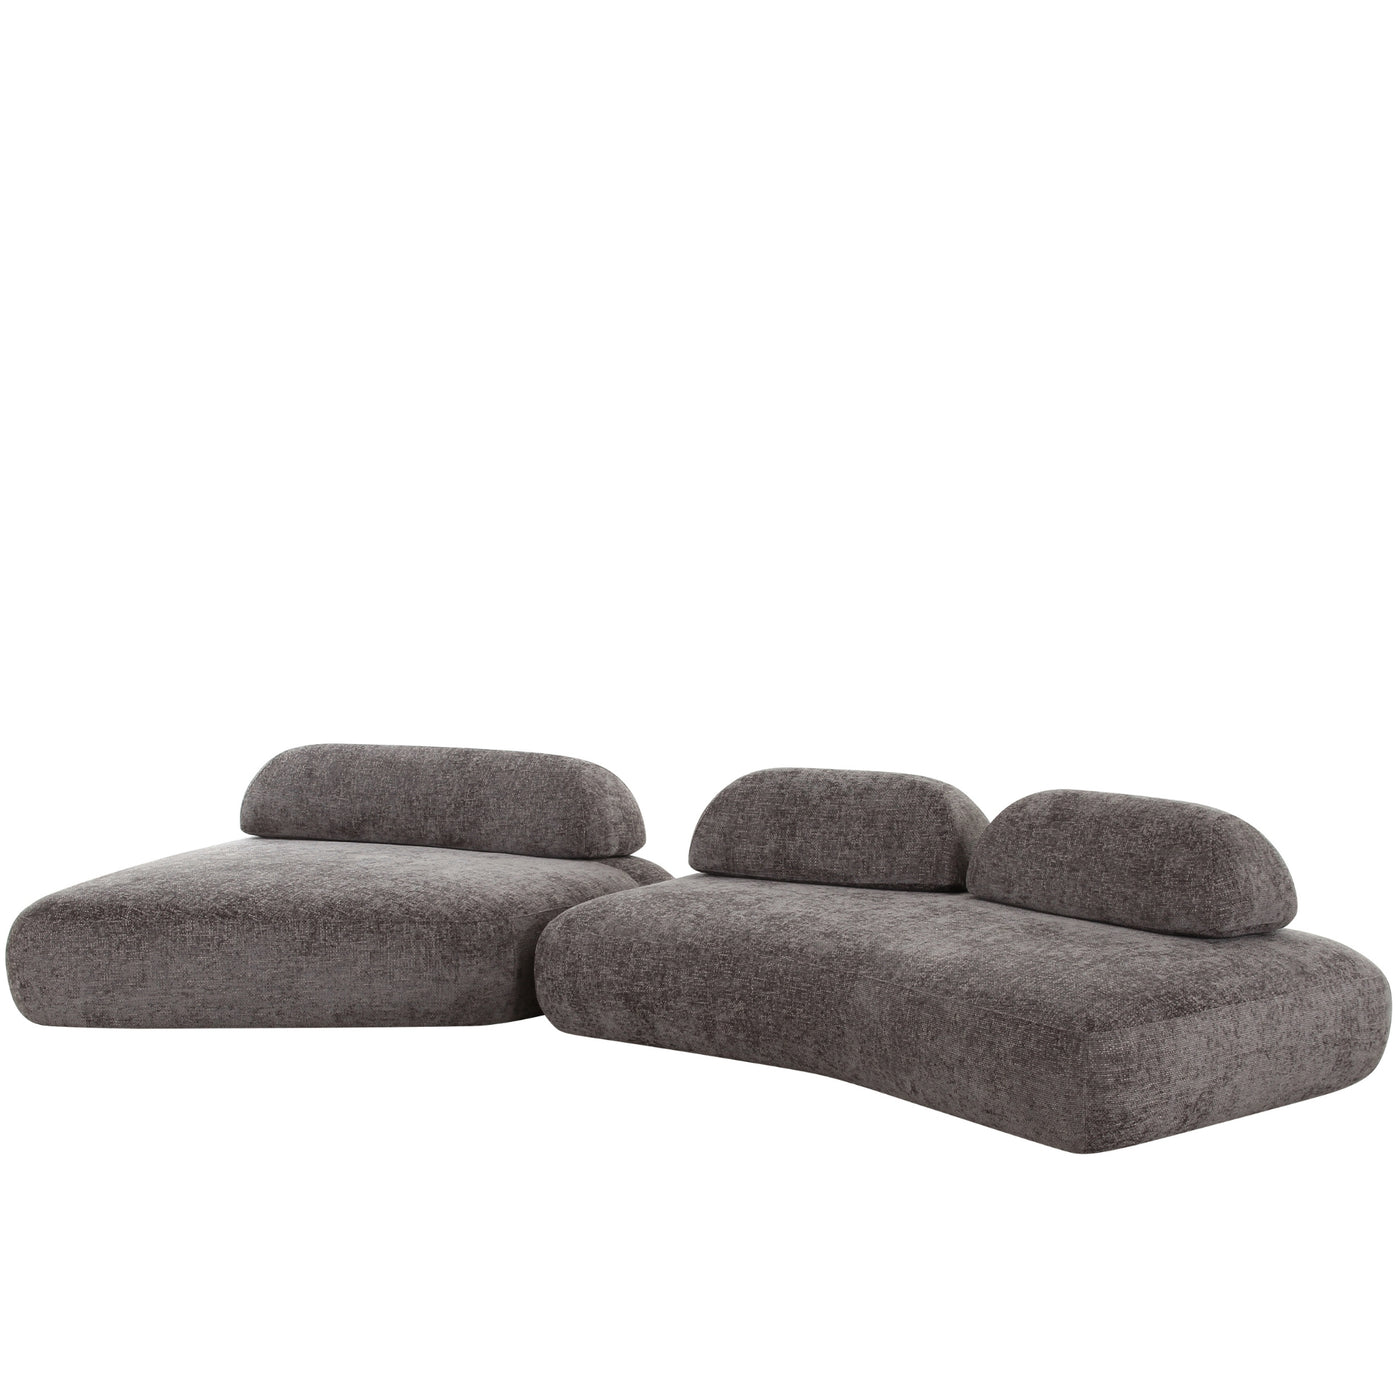 Colle Sectional Sofa